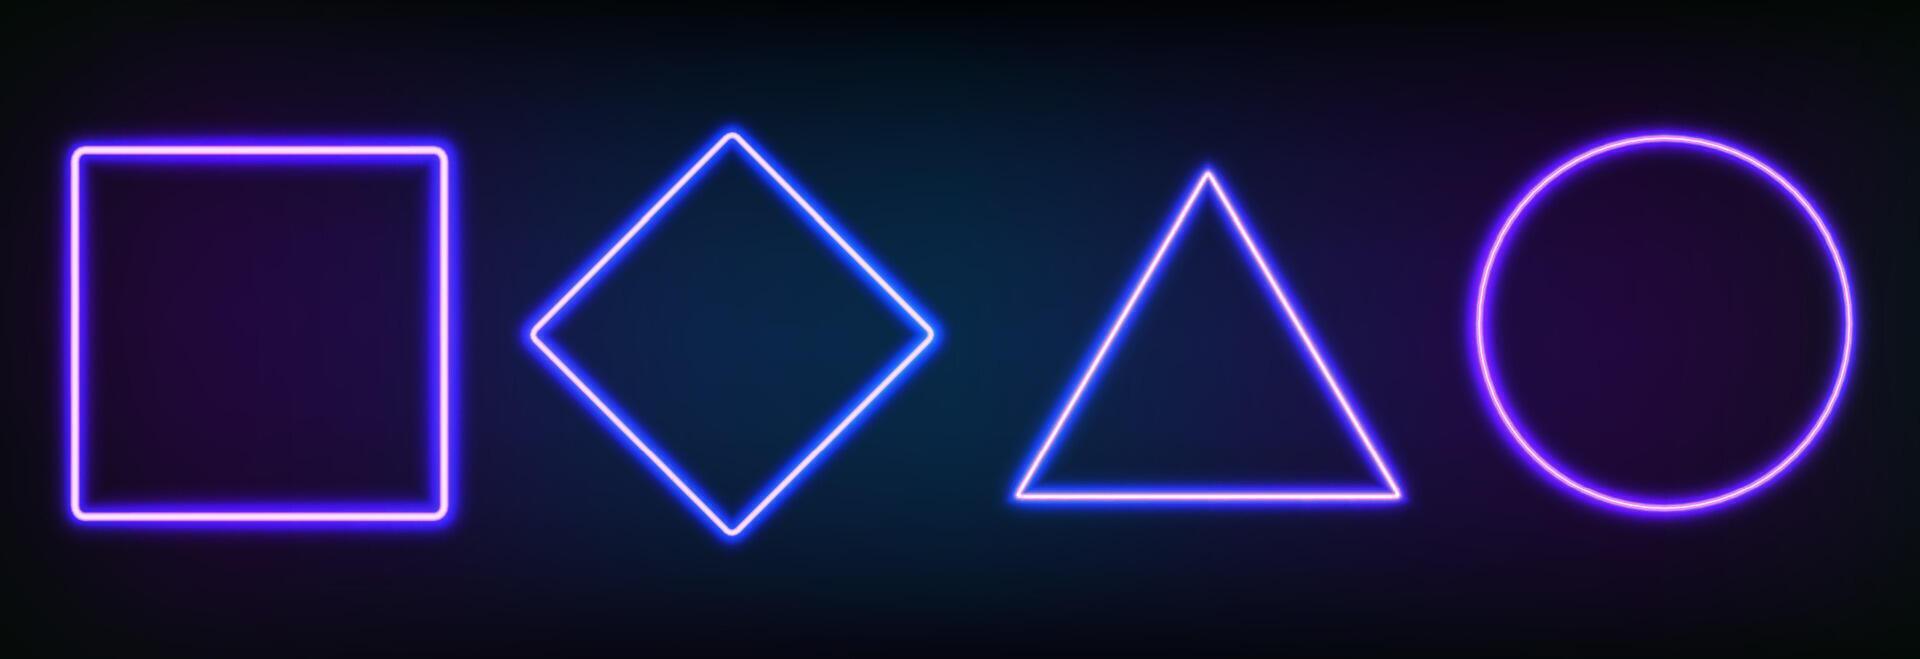 Realistic set of neon frames different geometric shapes with led backlighting .Glowing fluorescent border isolated on dark background. Bright illuminated shape of rectangle, square, circle and rhombus vector